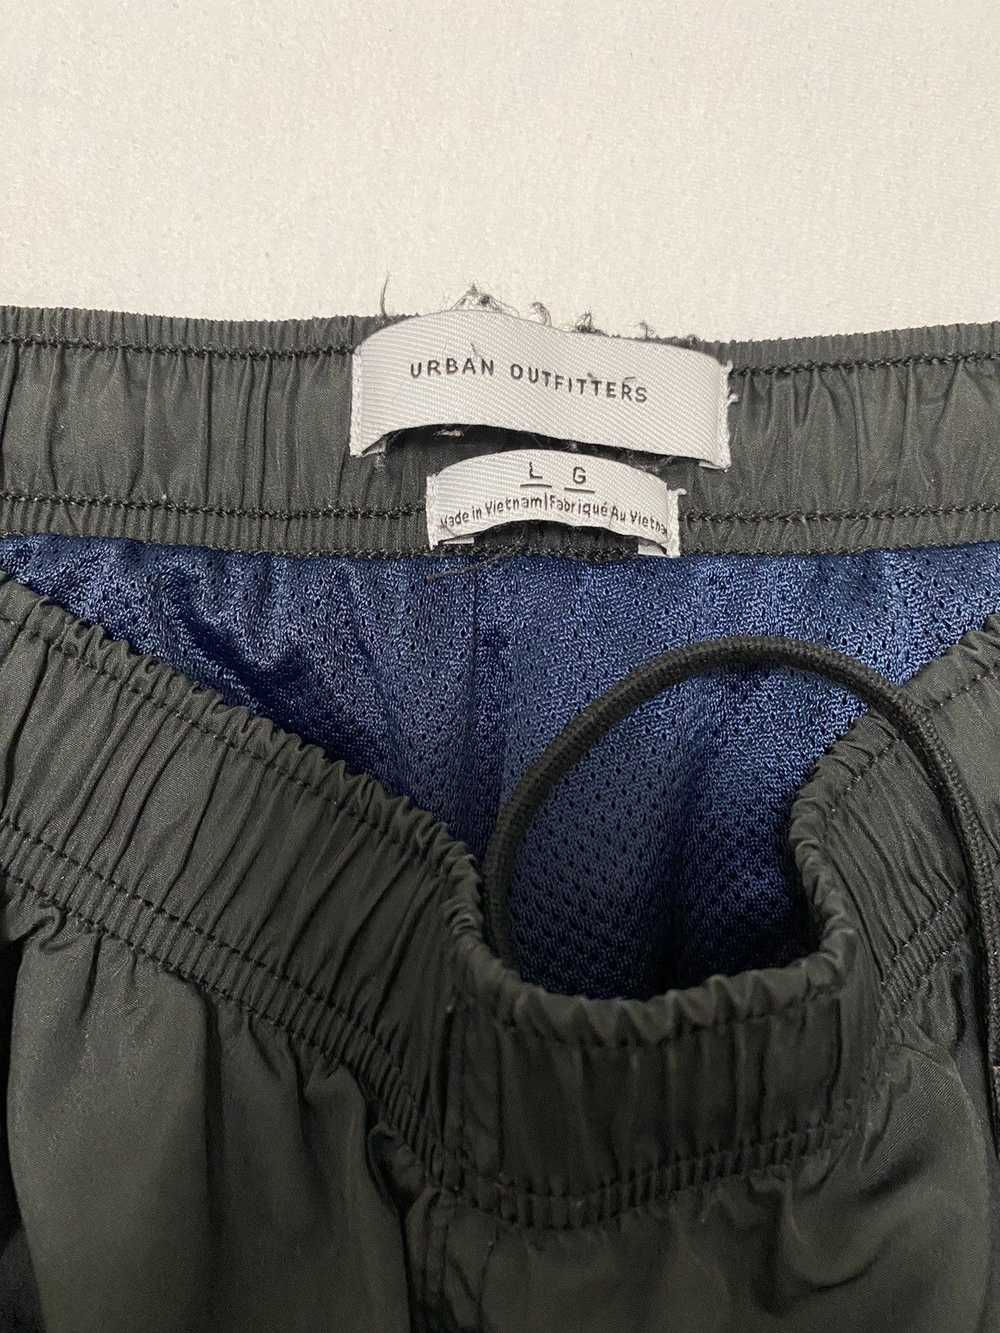 Urban Outfitters Urban Outfitters Trackpants - image 3